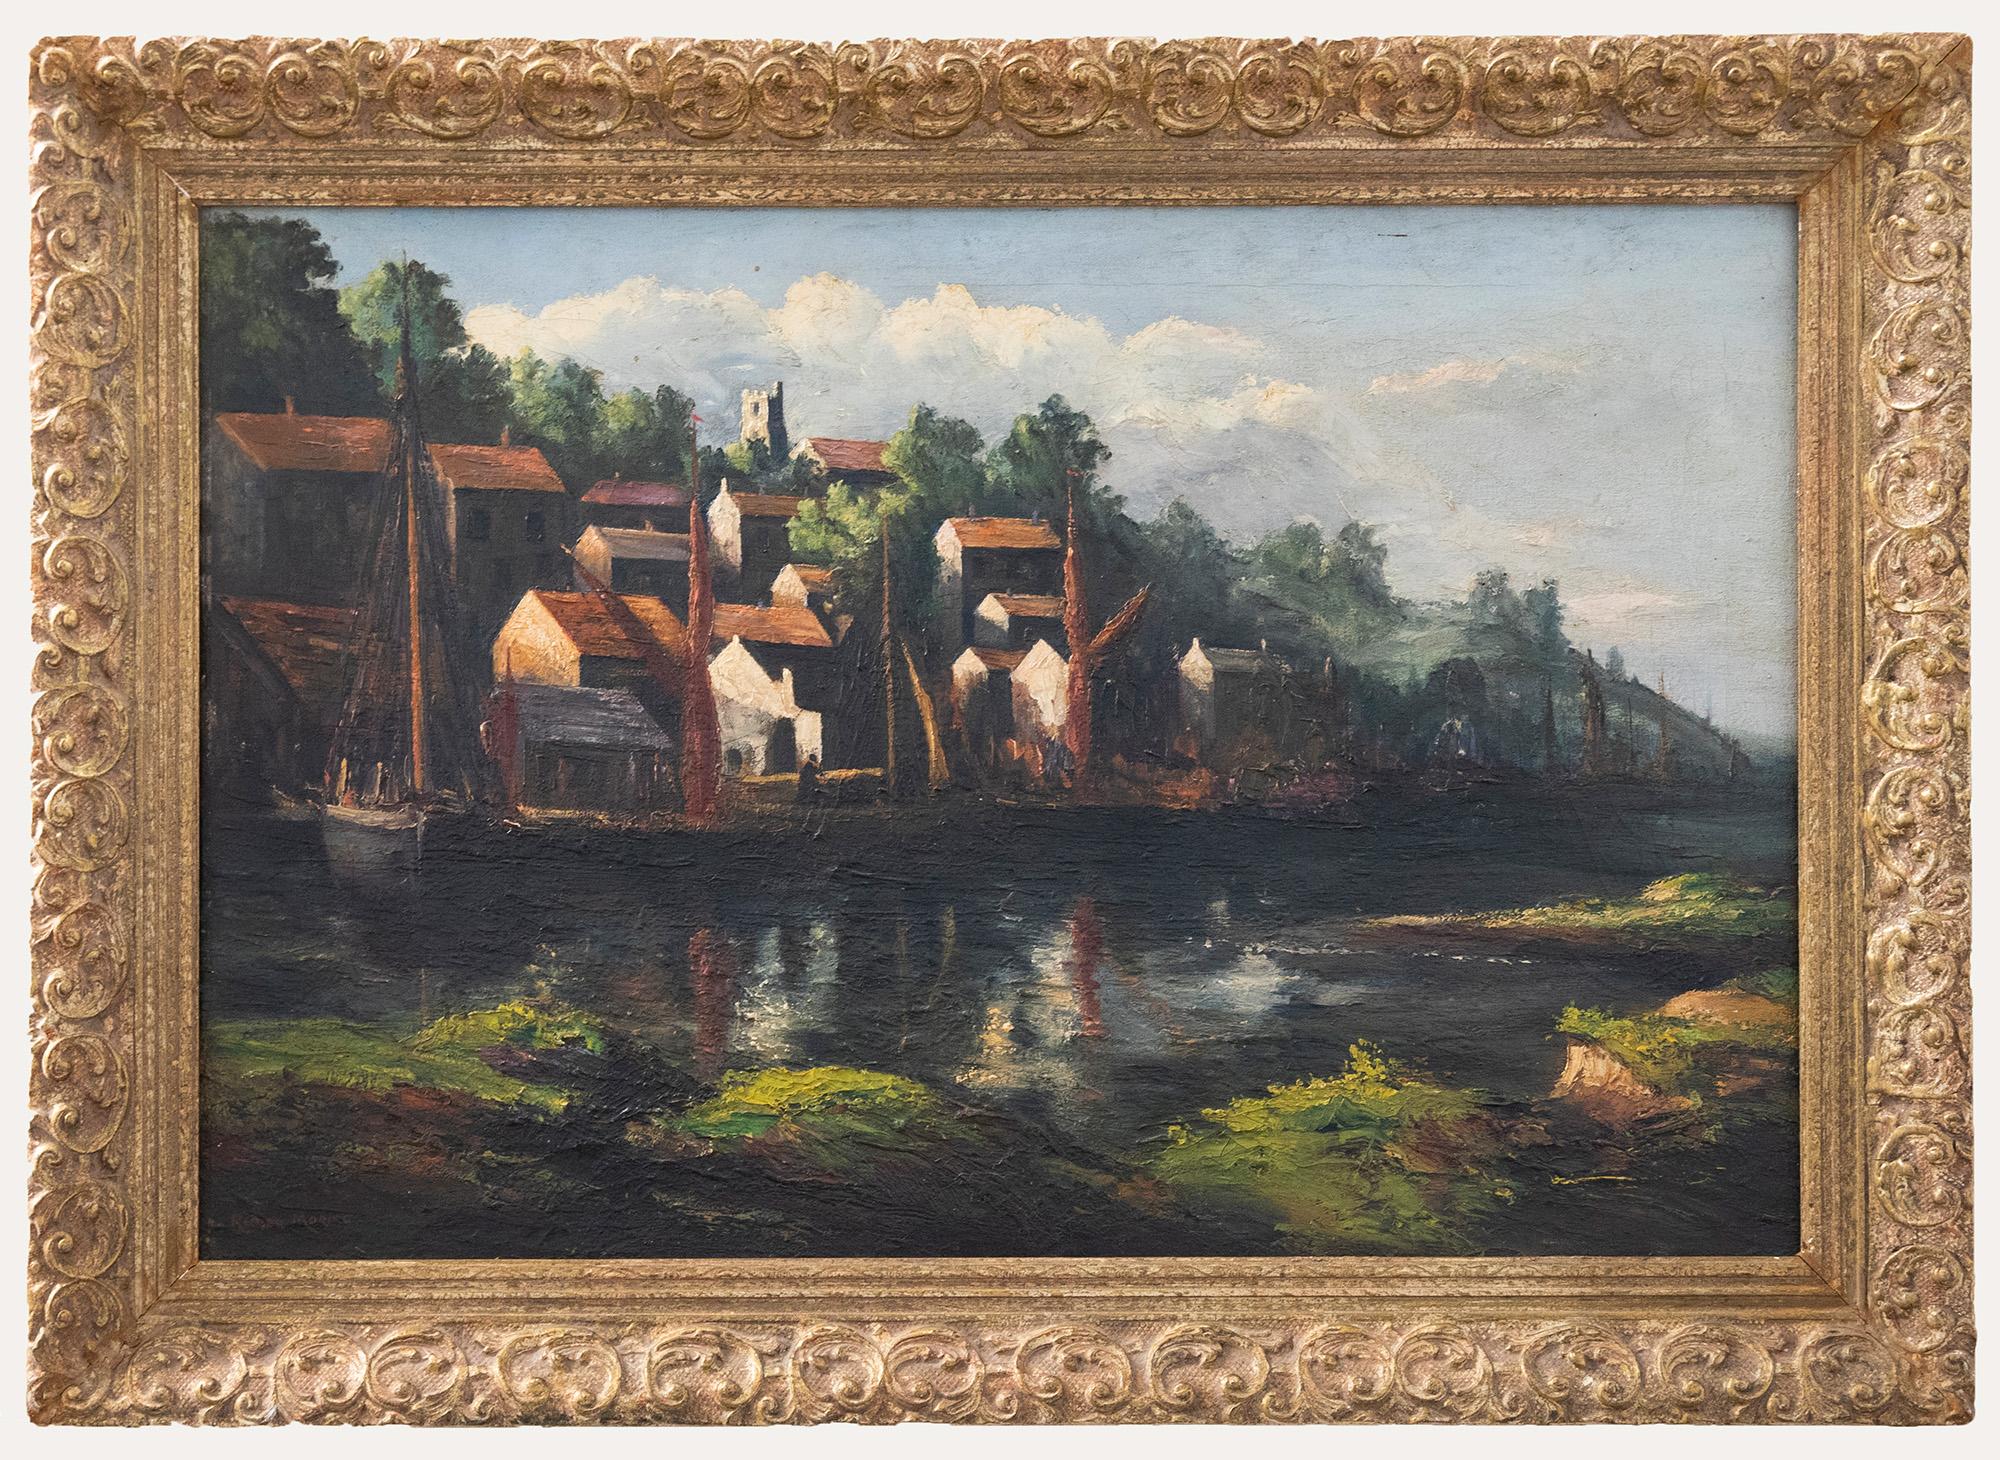 Unknown Figurative Painting - Reuben Moring - Framed Early 20th Century Oil, Leigh-on-Sea, Essex